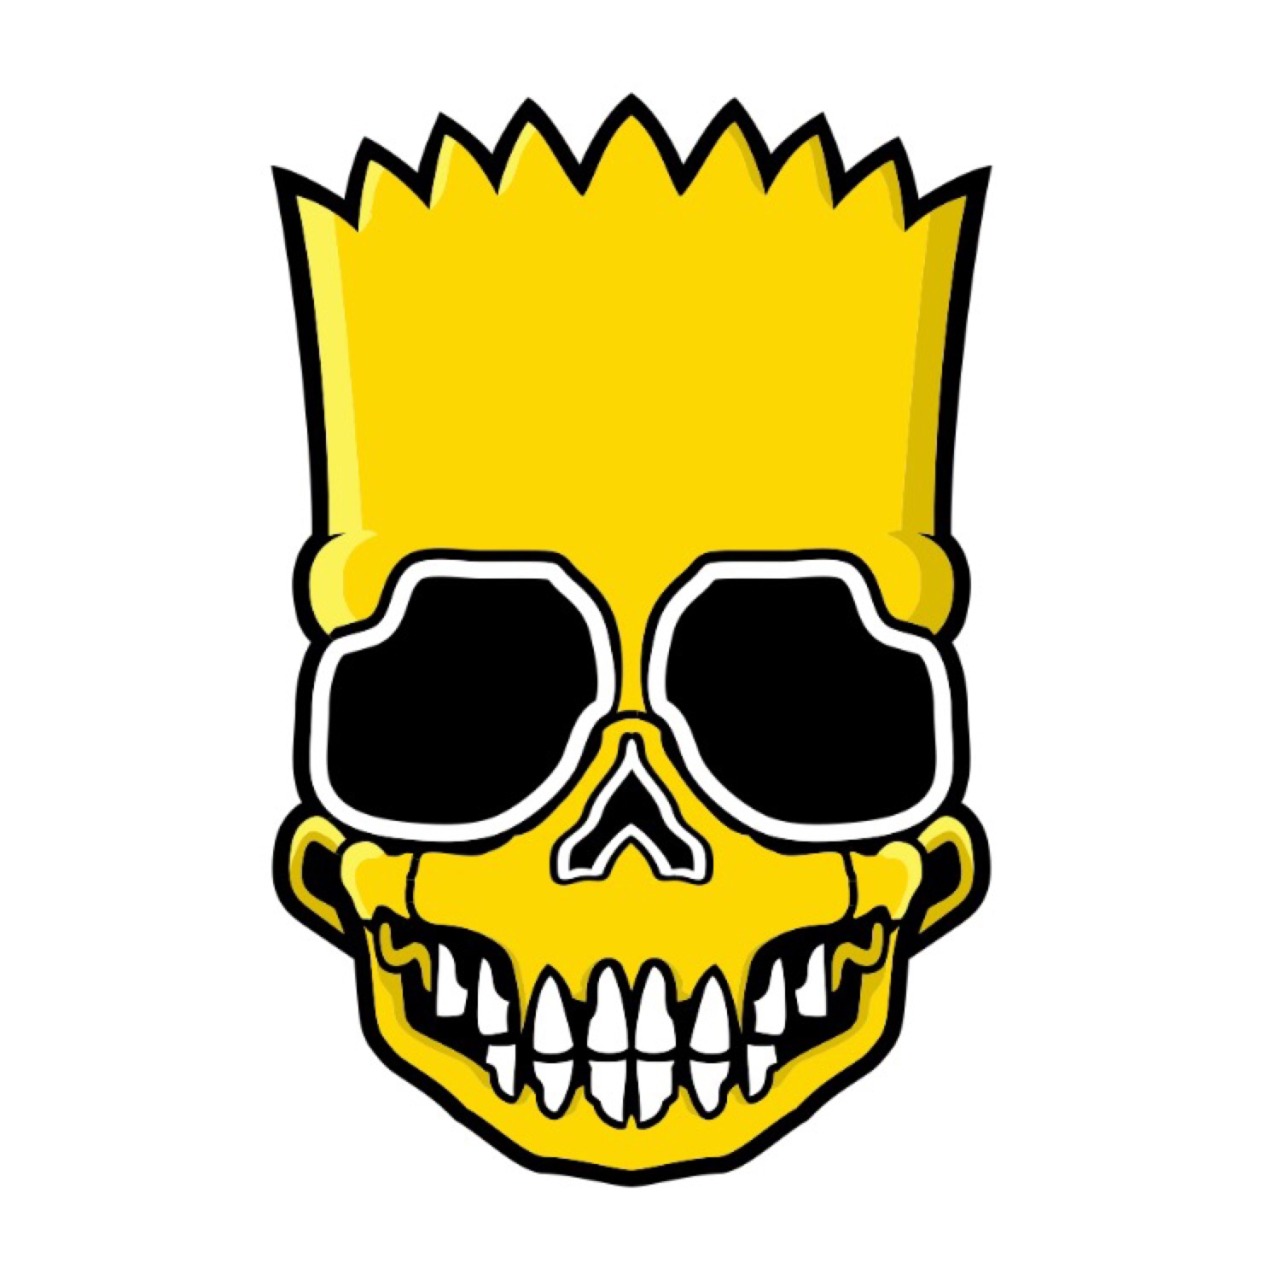 Vector Images for 'Bart simpson'. 